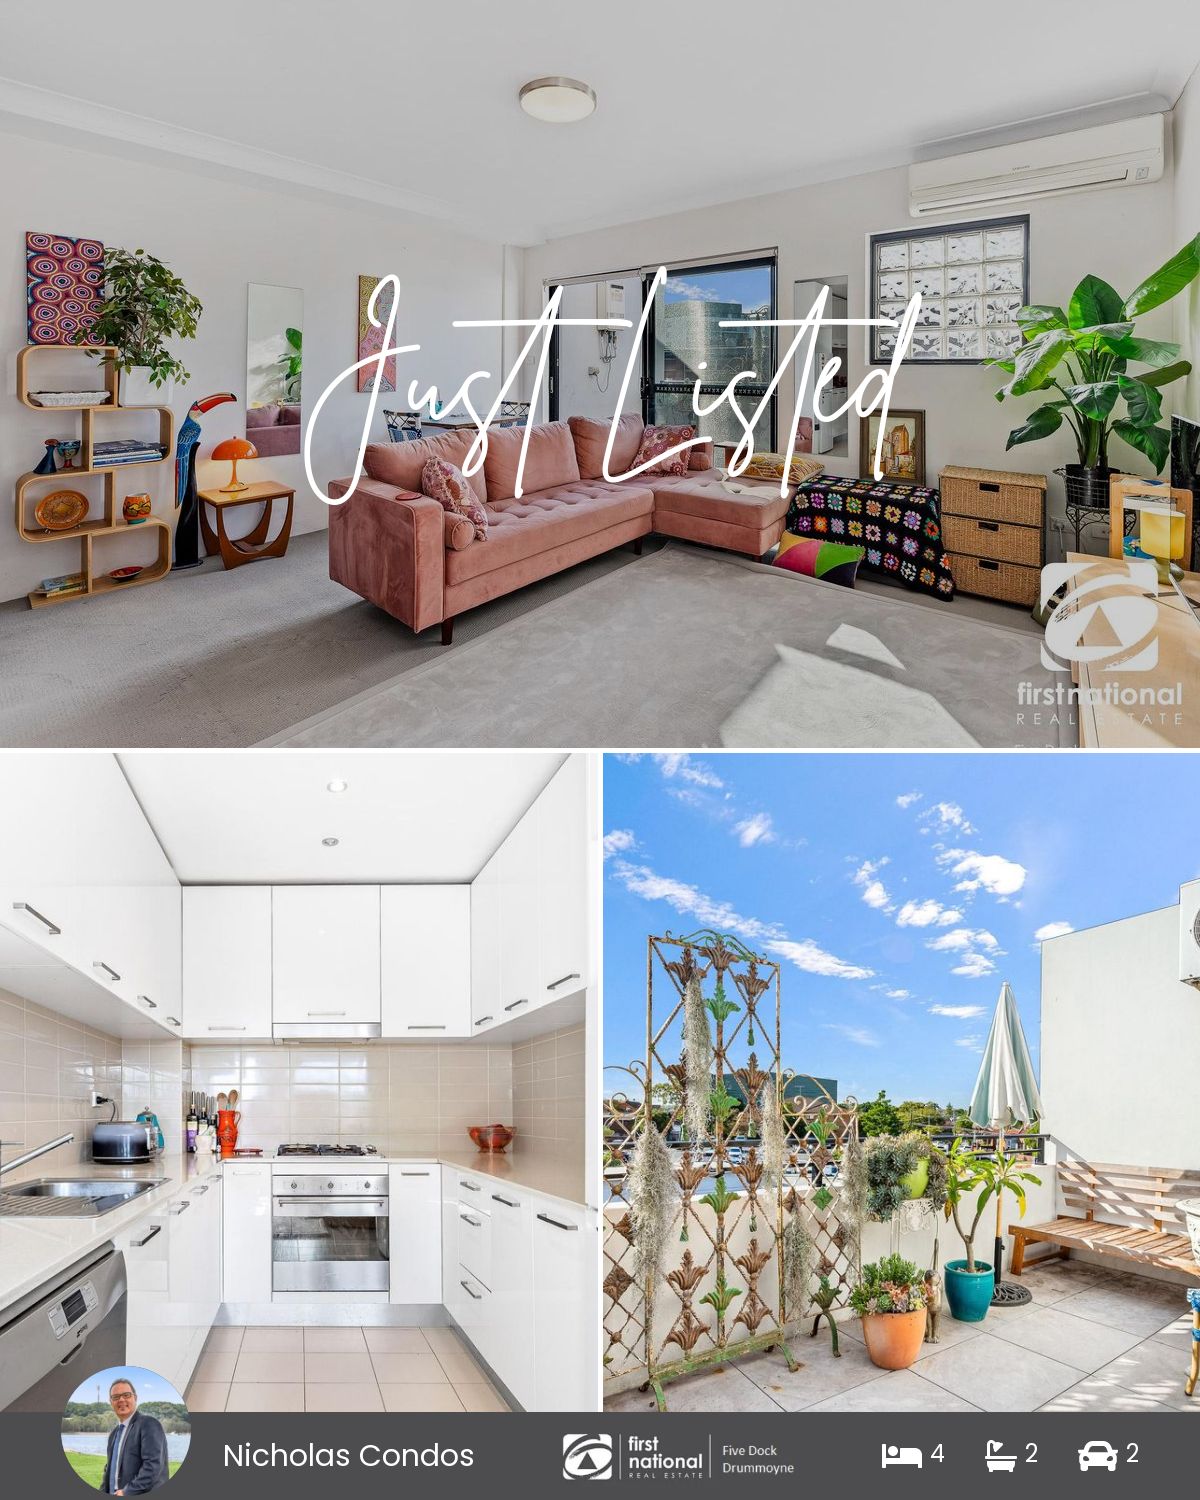 11/185 First Avenue, Five Dock, NSW 2046 | Realty.com.au